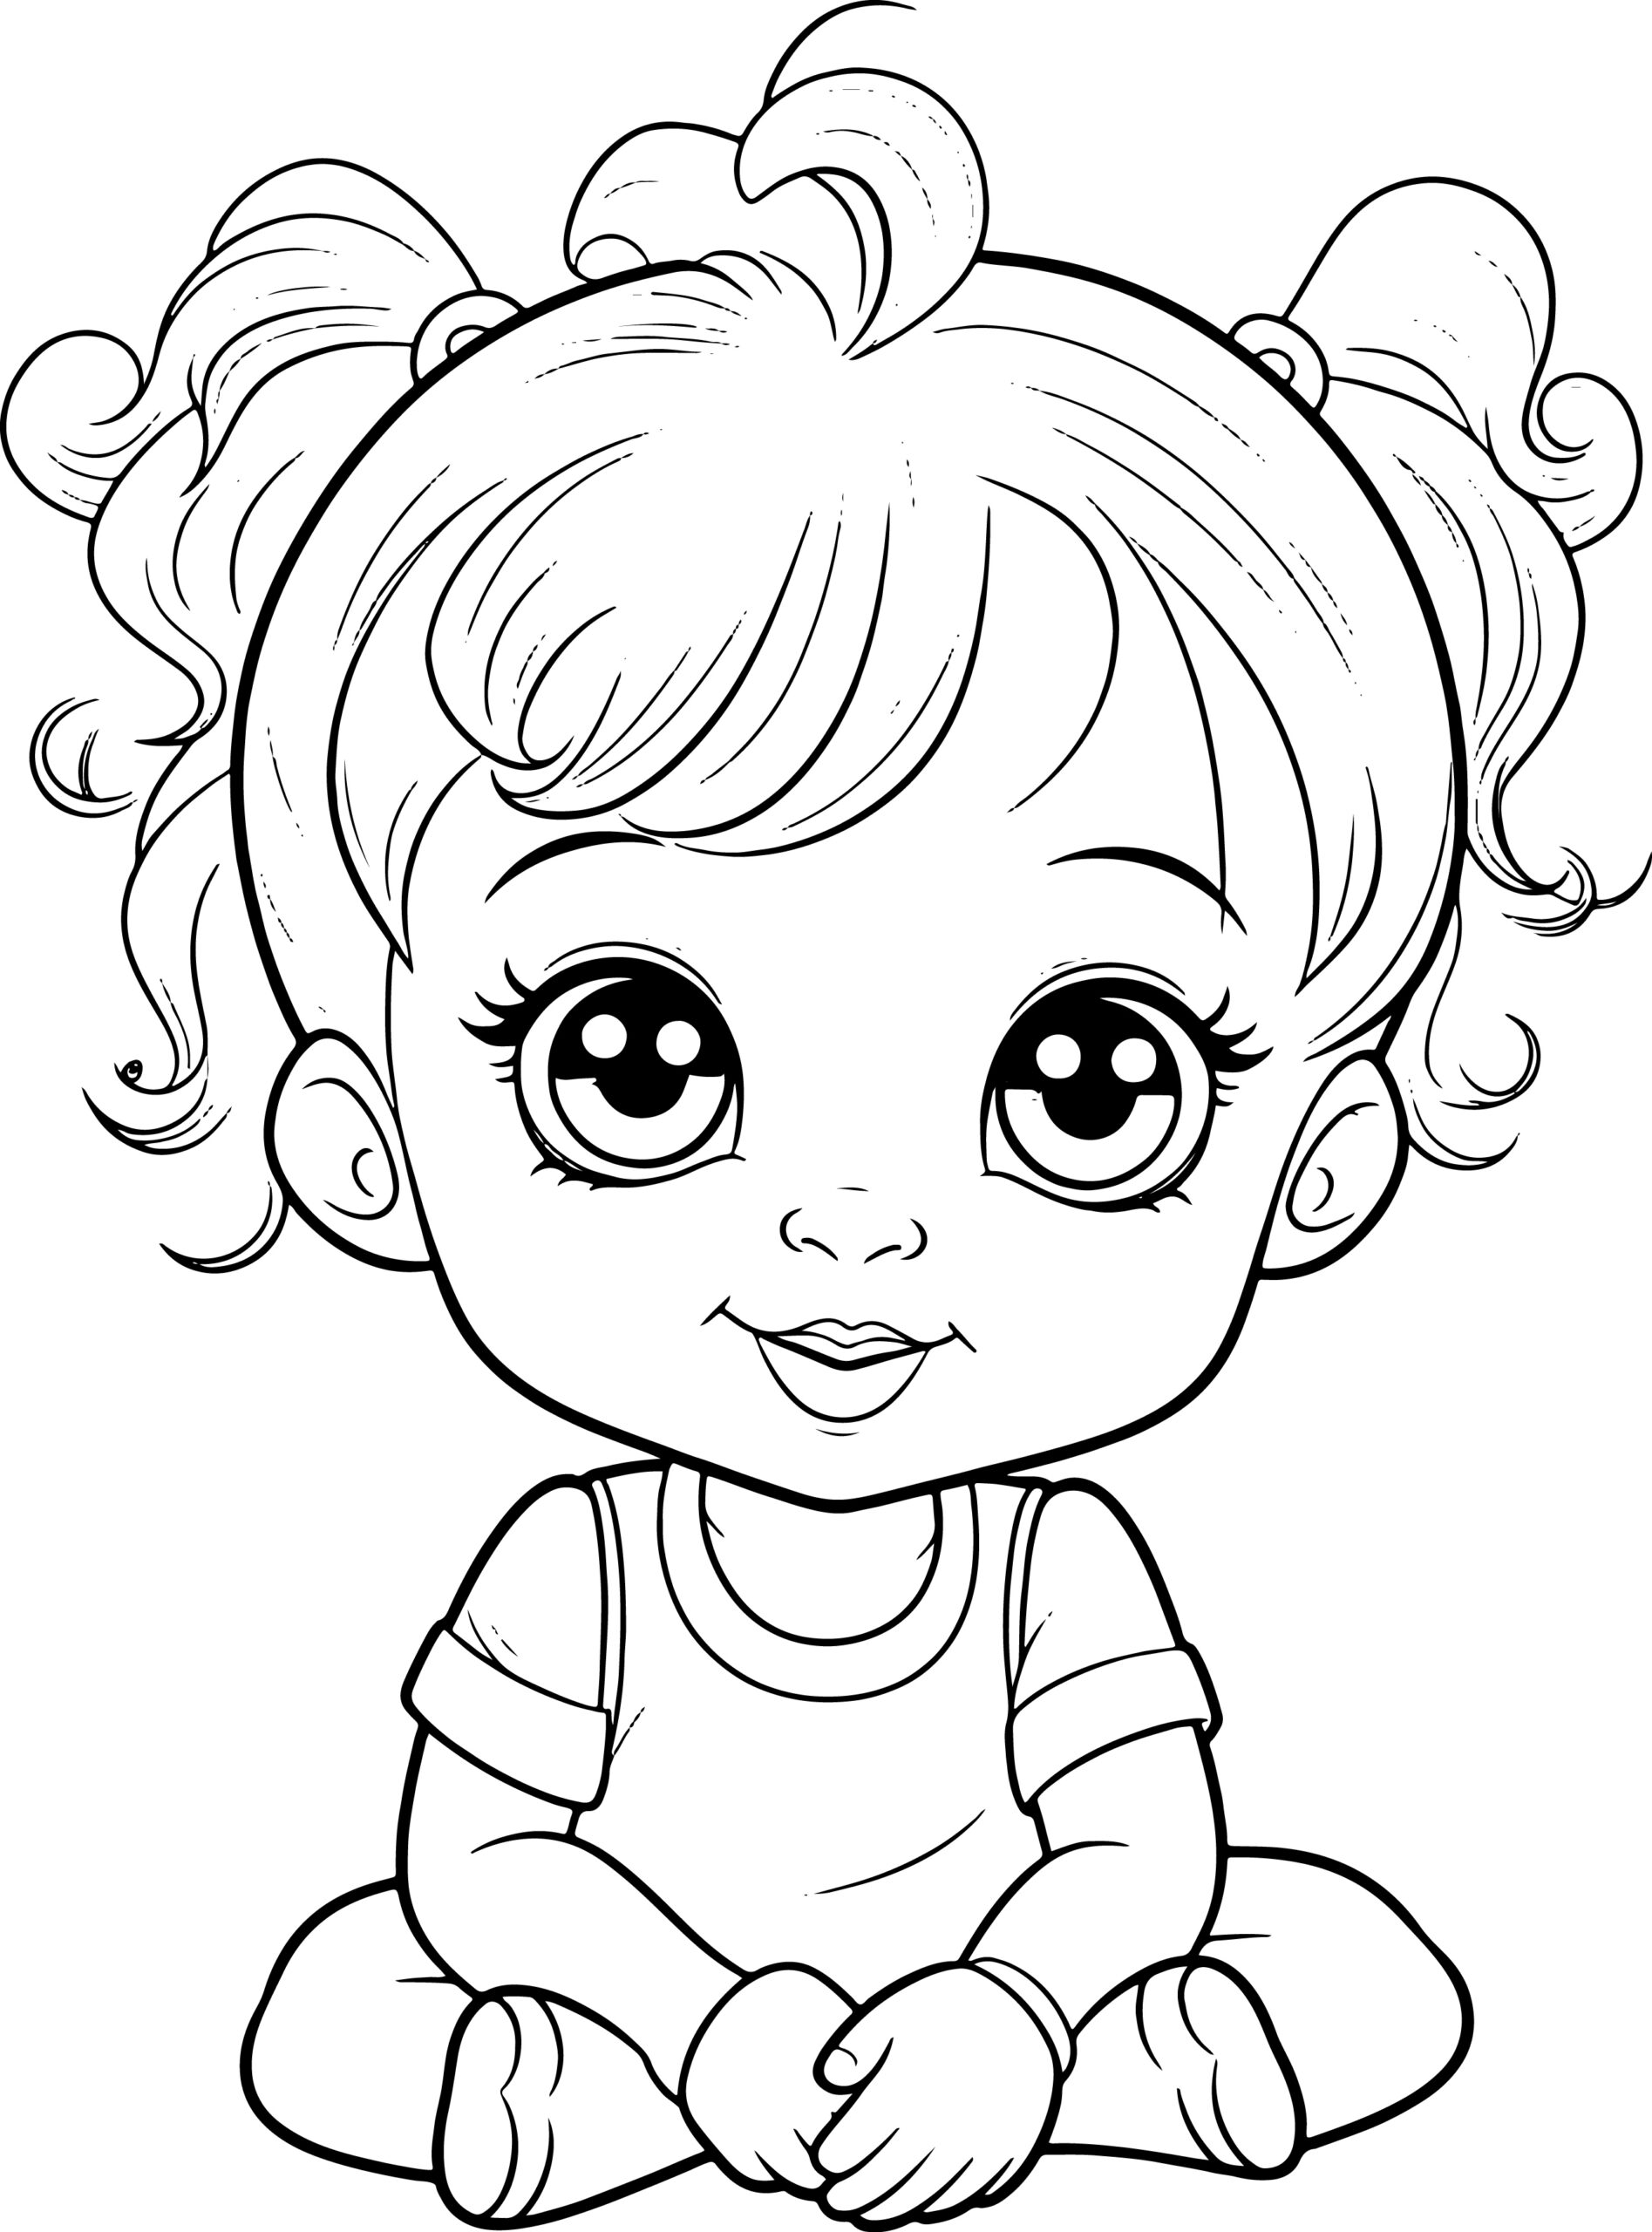 Baby colouring book for toddlers and kids boys and girls adorable illustrations of babies to color made by teachers